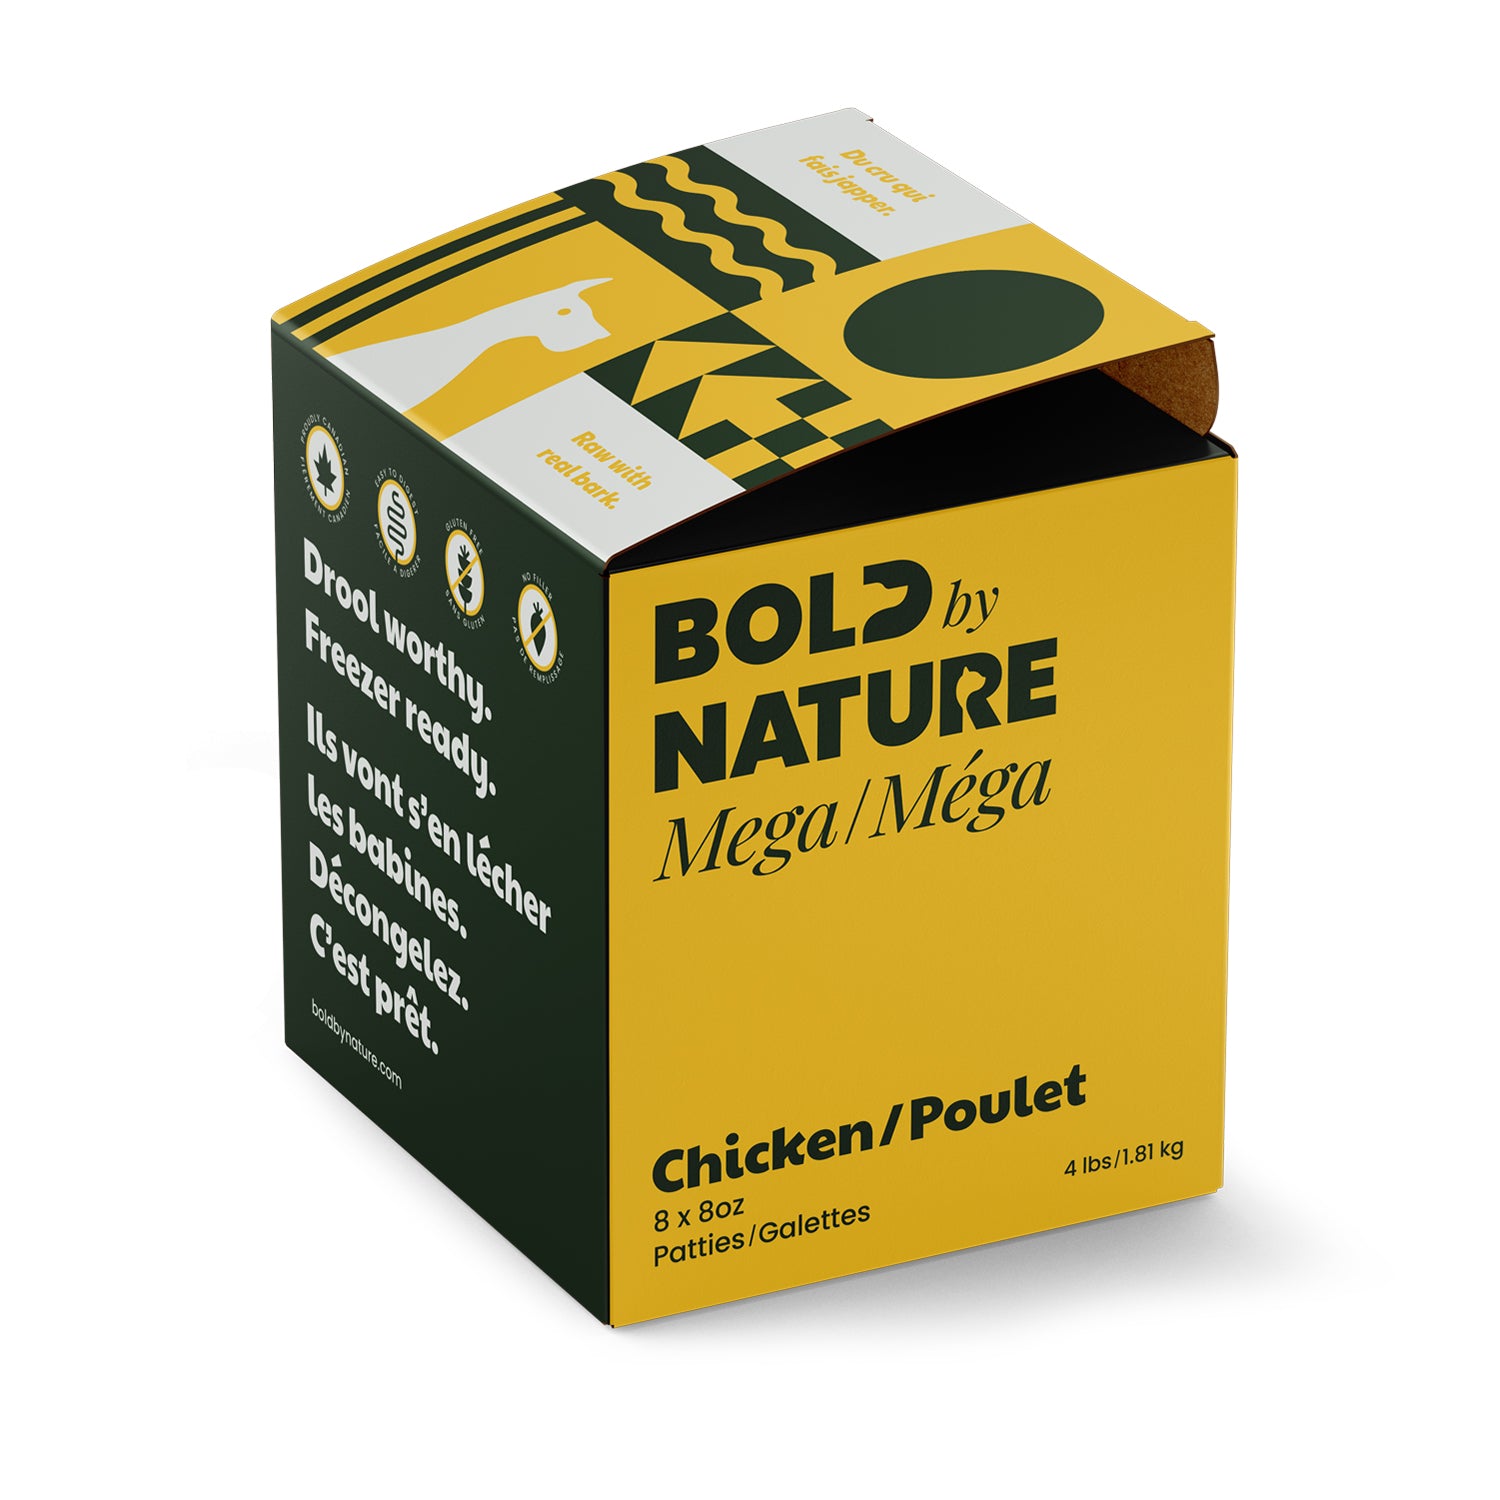 Bold by Nature - Mega Dog Chicken - 4lbs